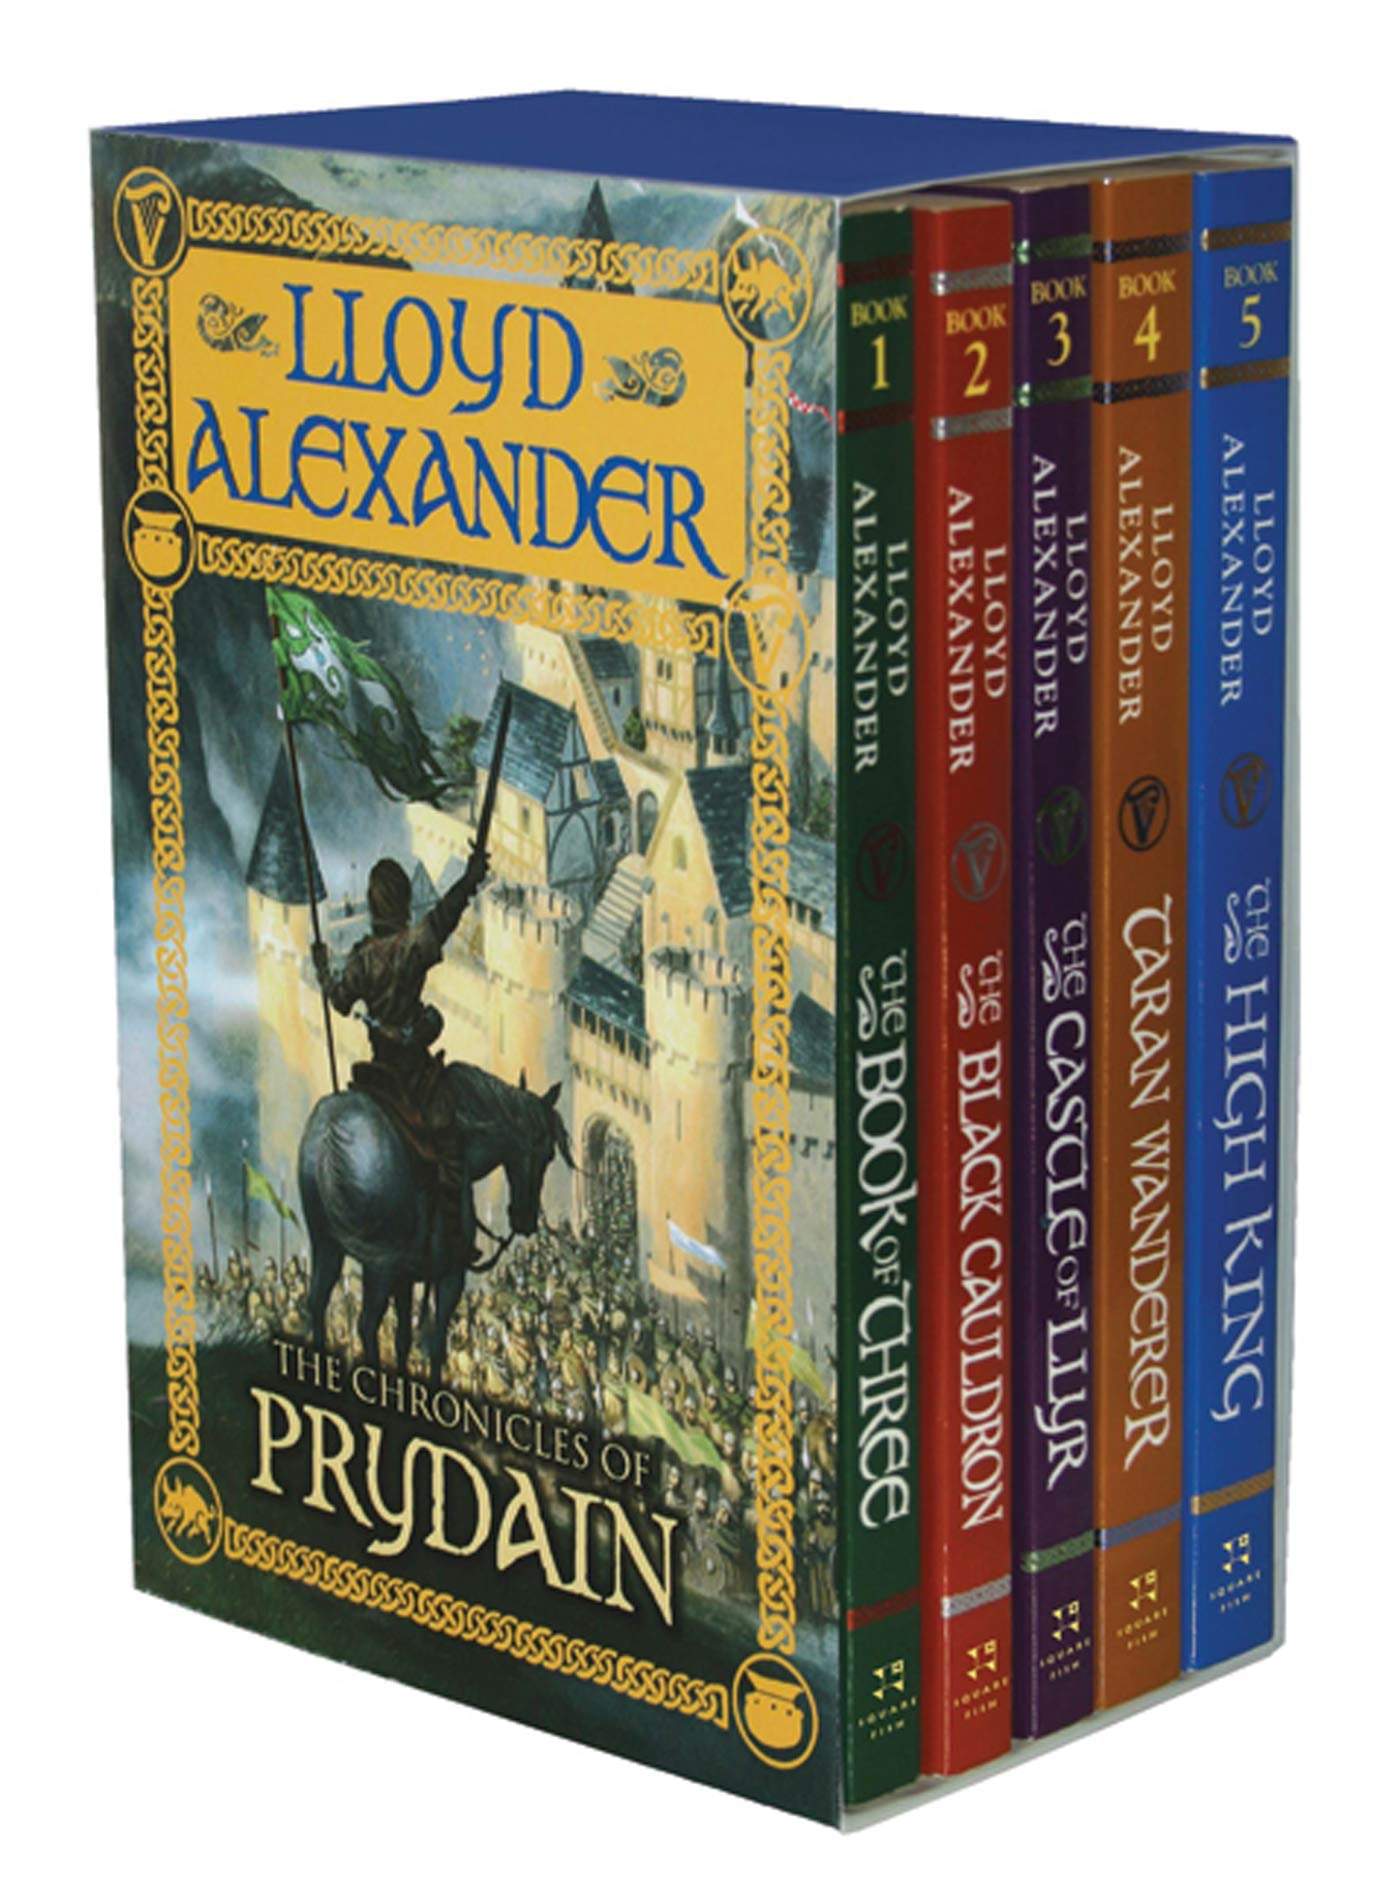 the chronicles of prydain review